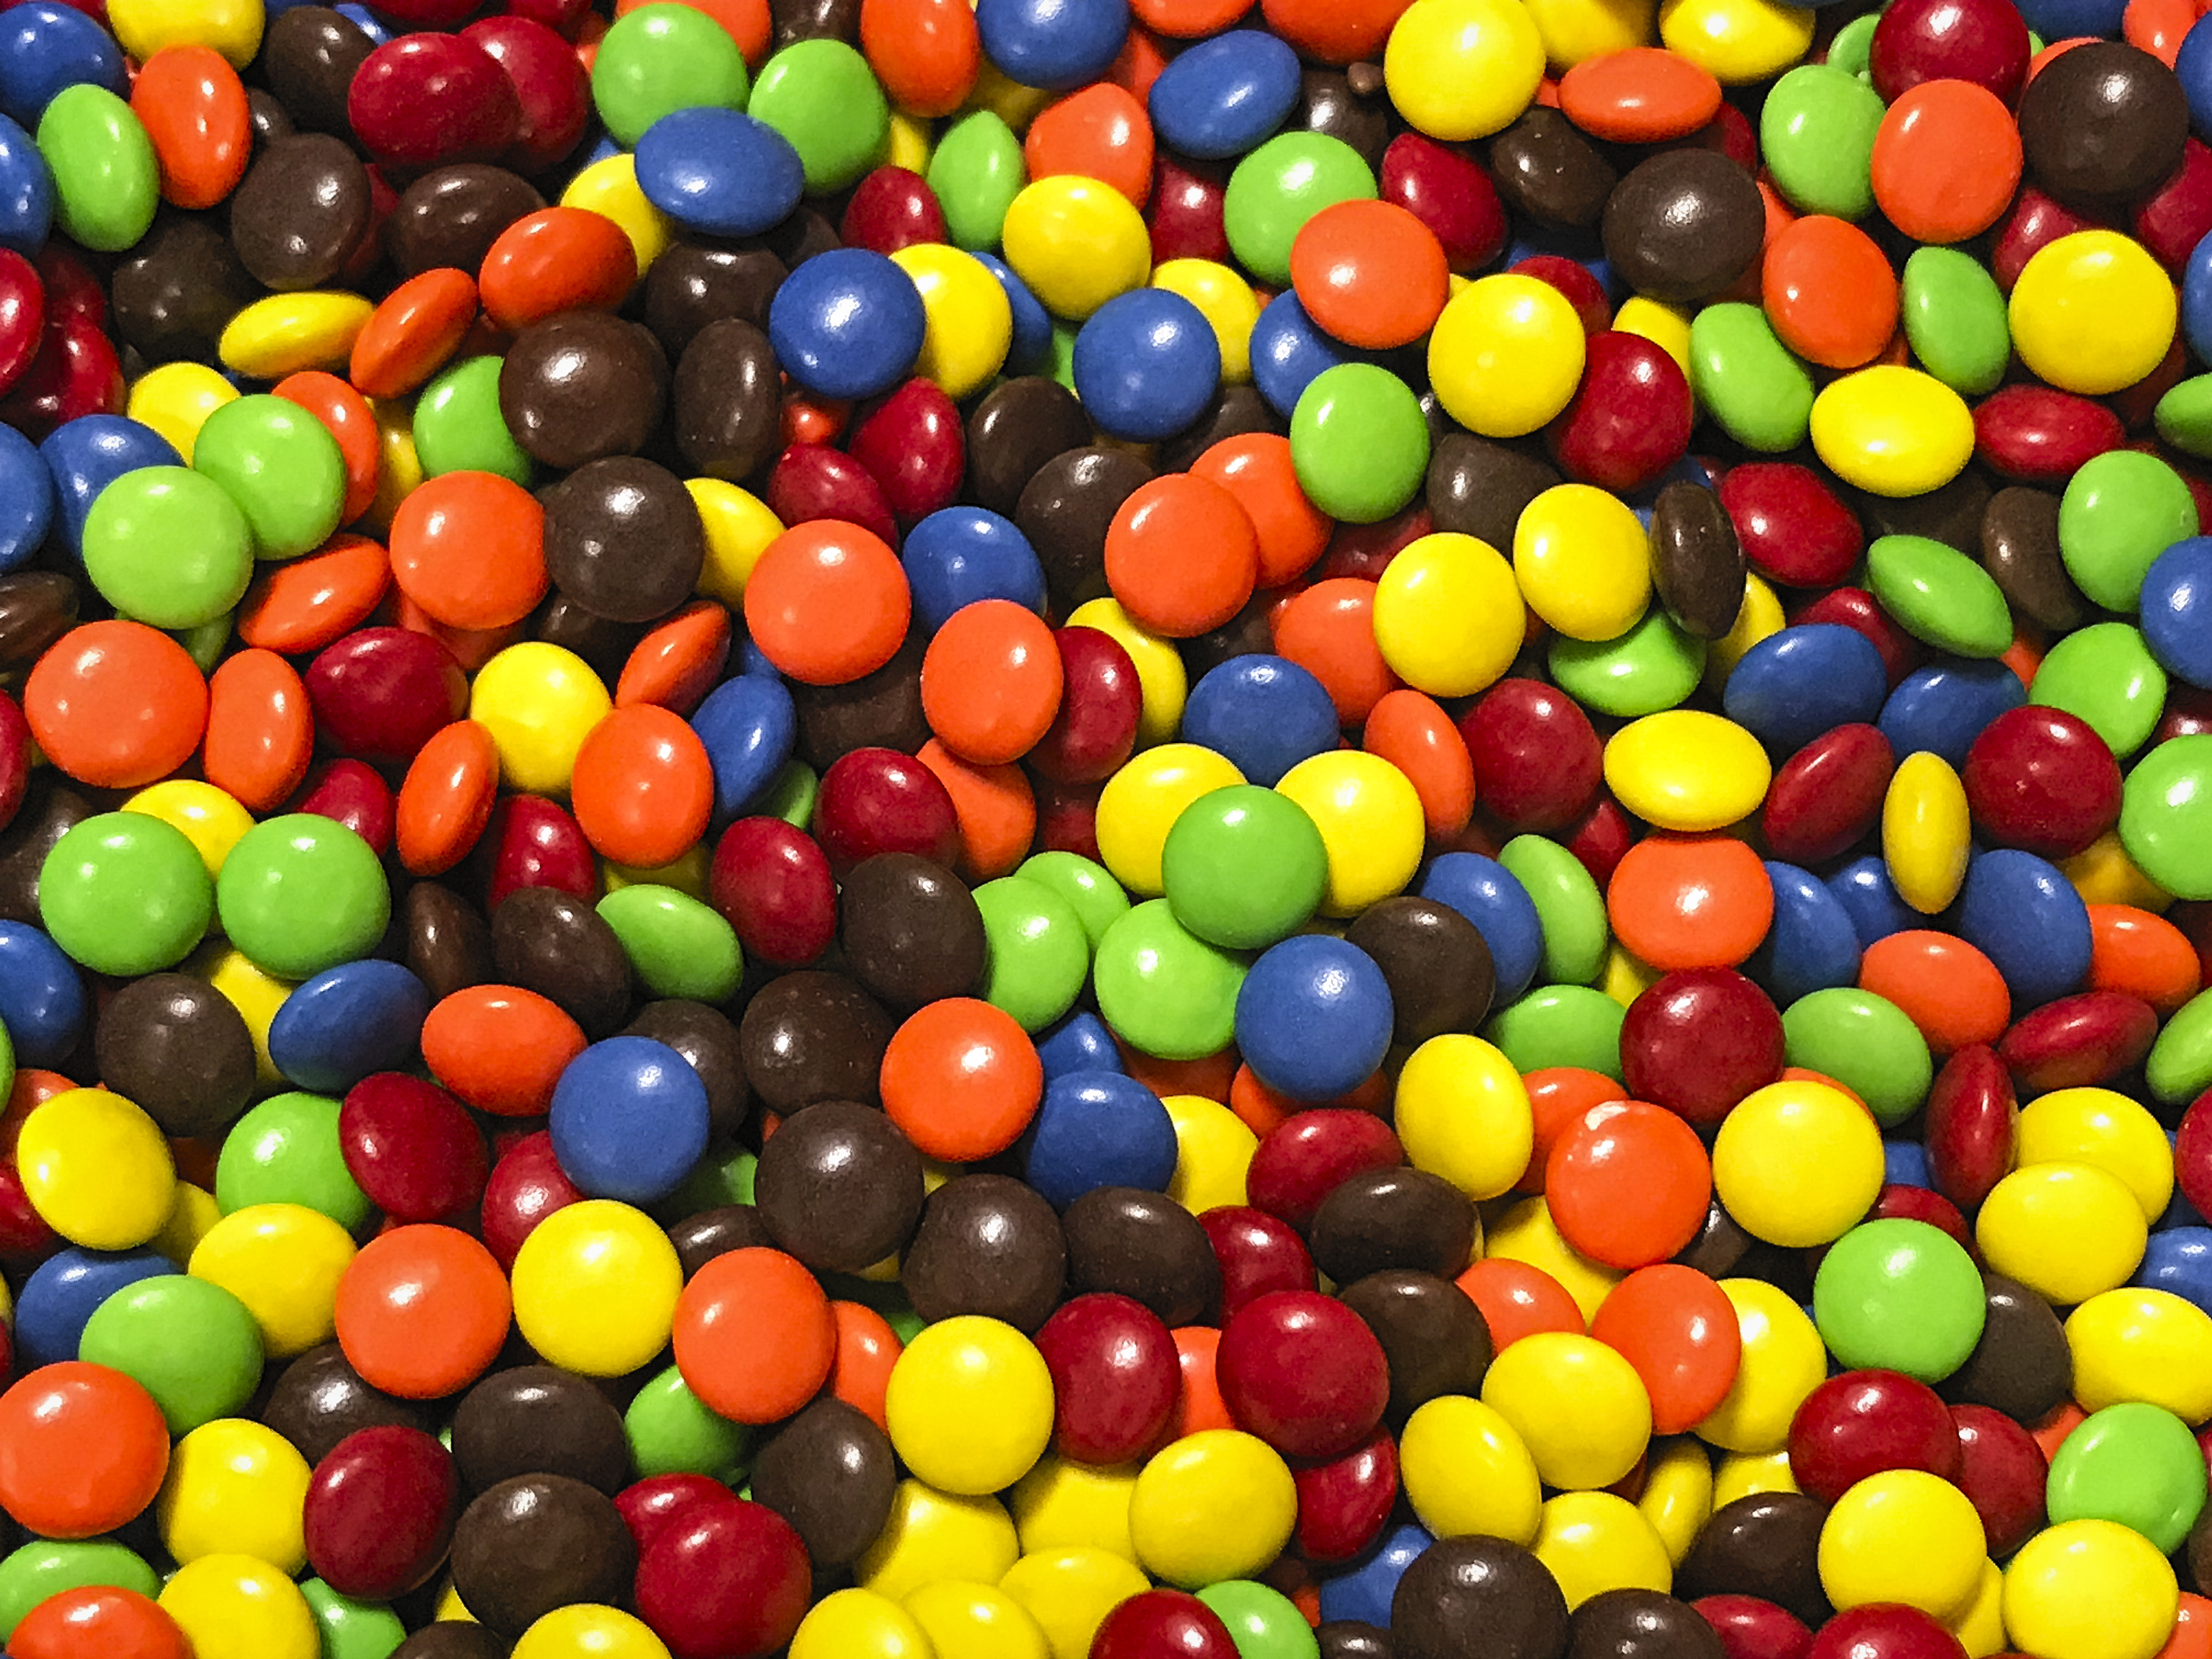 British Engineer Stacks 5 M&M's, Breaks Guinness World Records Title